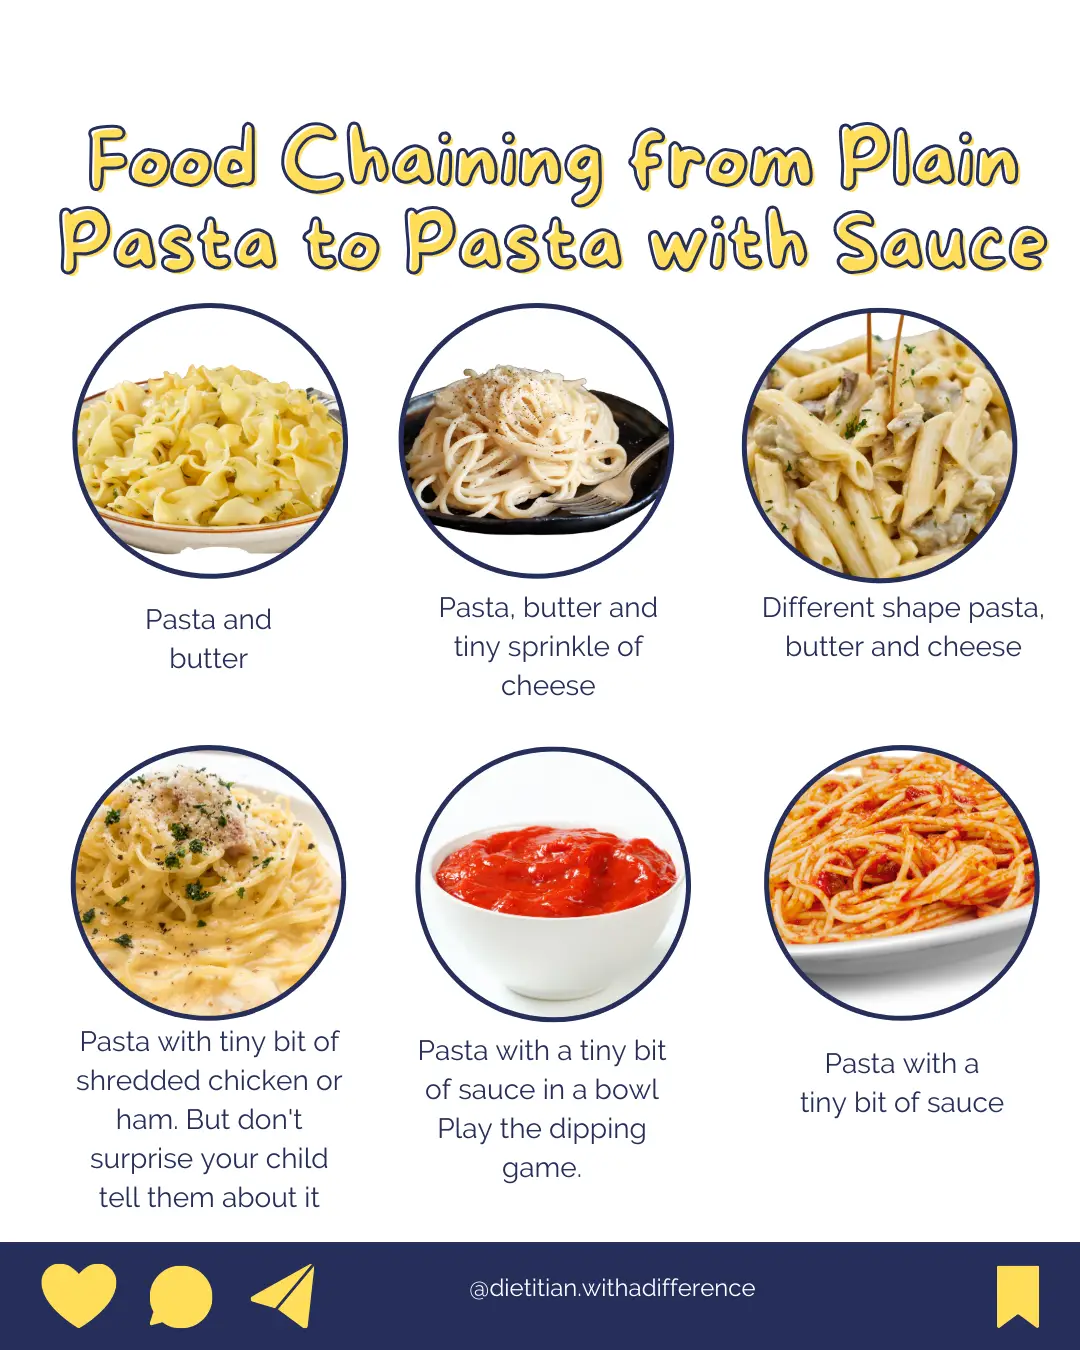 Food chaining with pasta and sauce